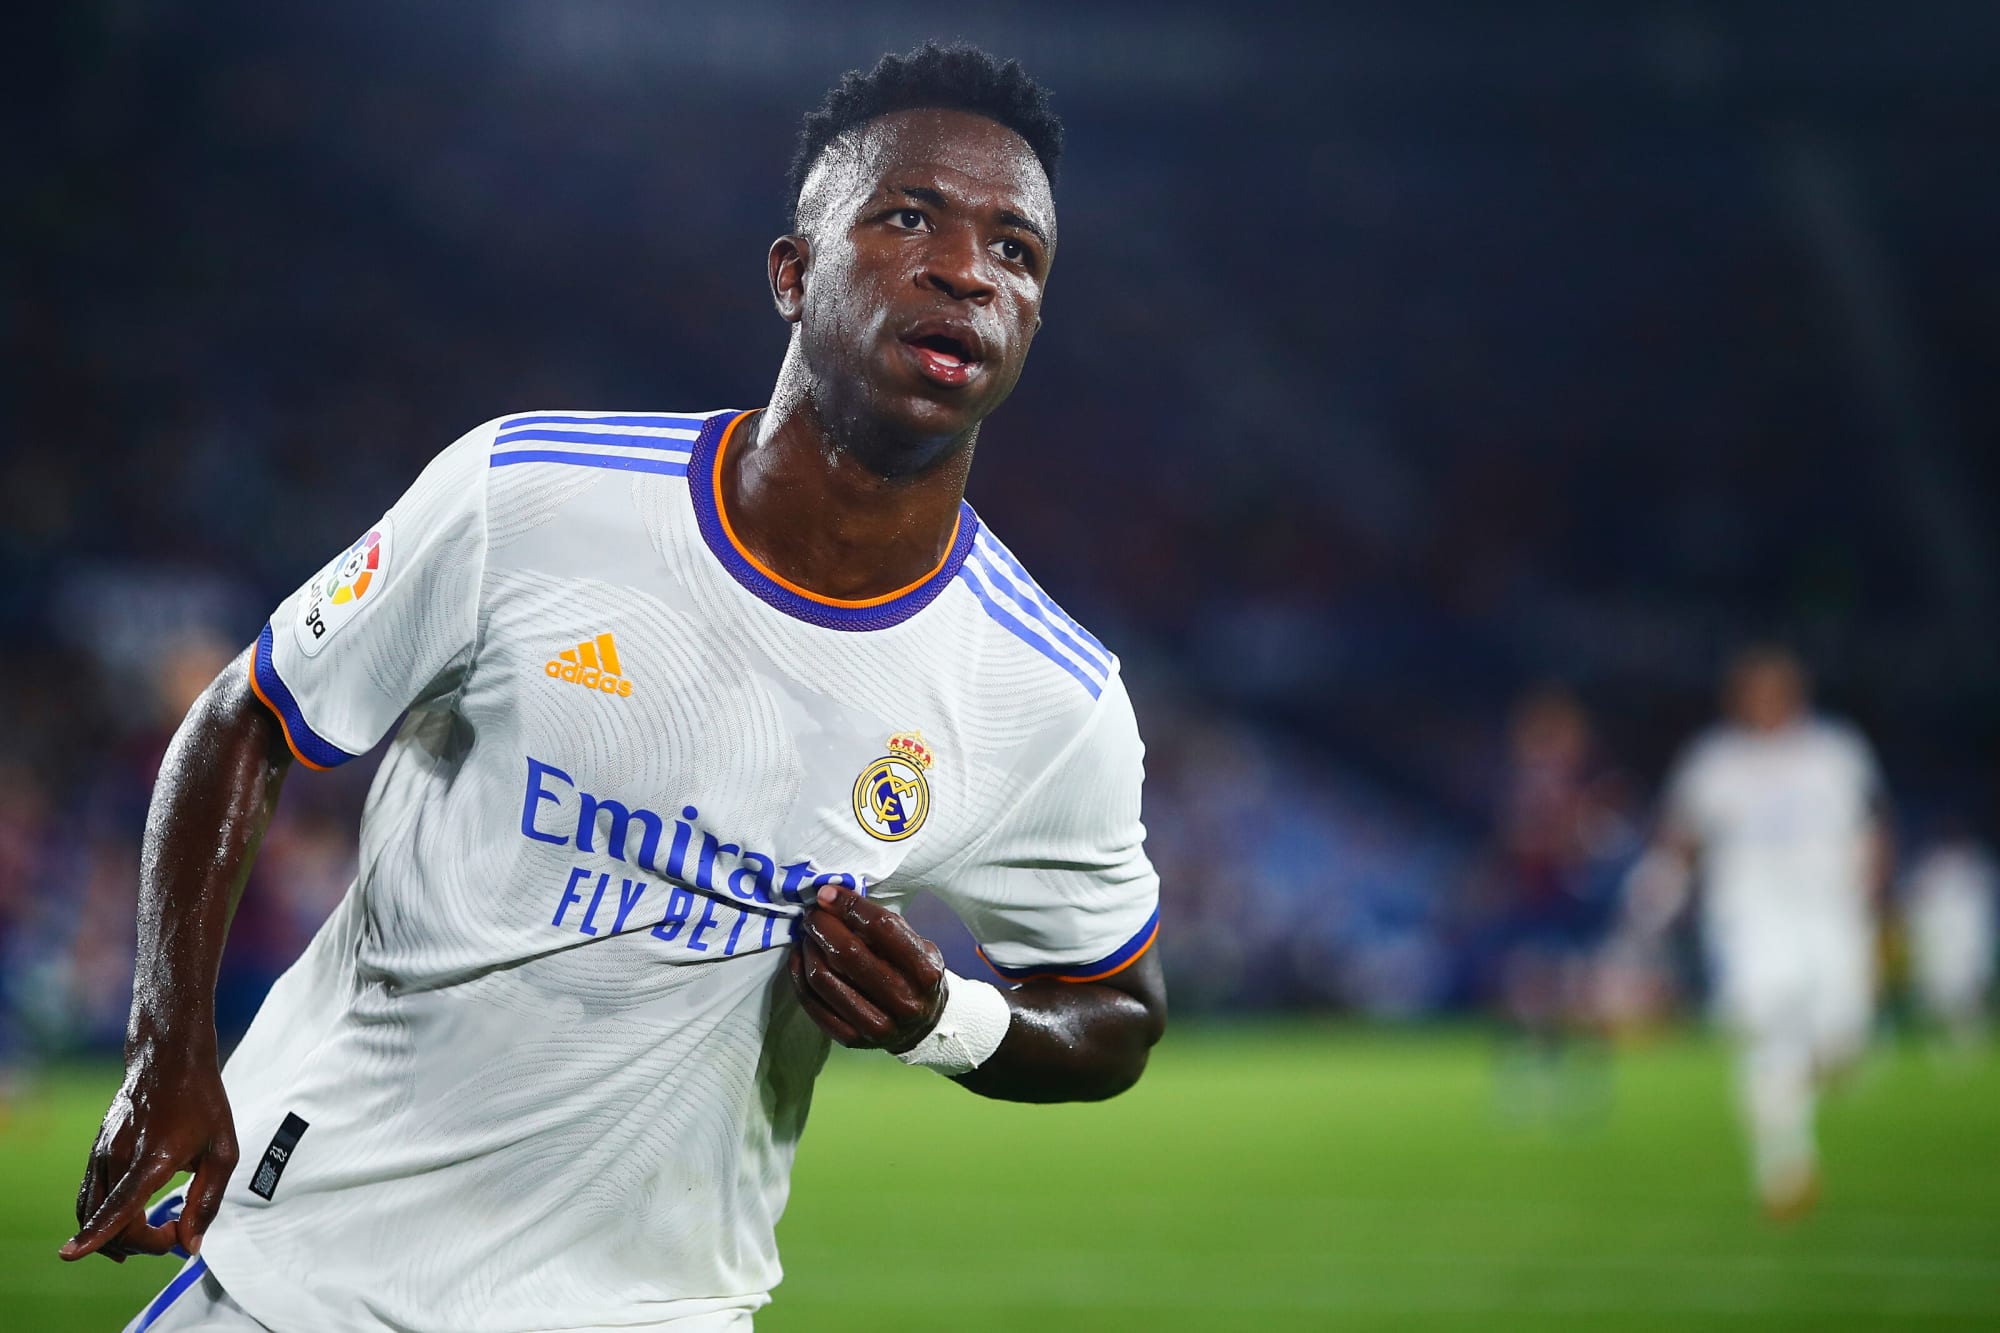 Real Madrid Player Ratings August 2021: Vinicius, Benzema lead the way